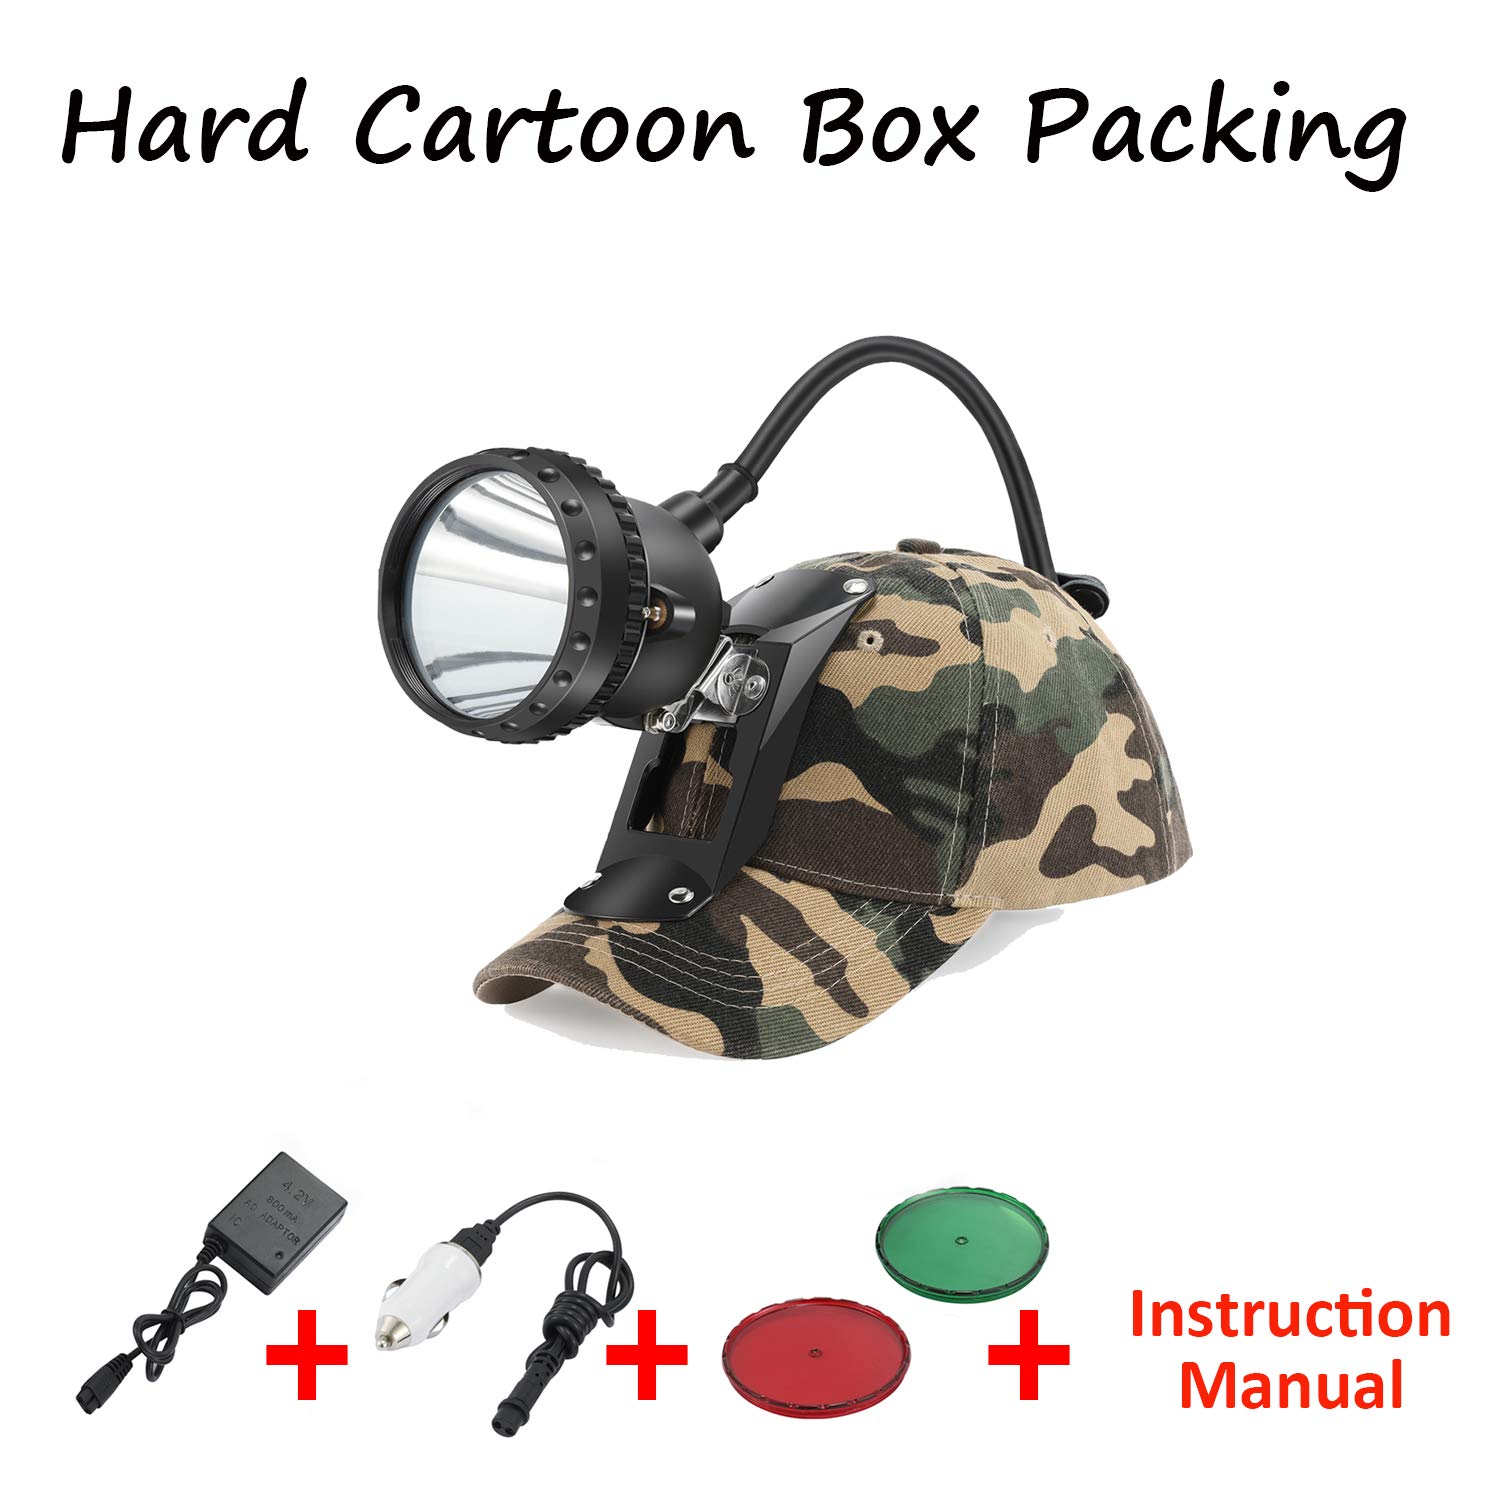 GearOZ Coon Hunting Lights Headlamp 2.0 for Coyotes Hog Predators, 4 Lighting Modes, Waterproof Camping Hiking Fishing Hunting Headlamp Rechargeable Bright Headlight with Comfort Hunting Hat